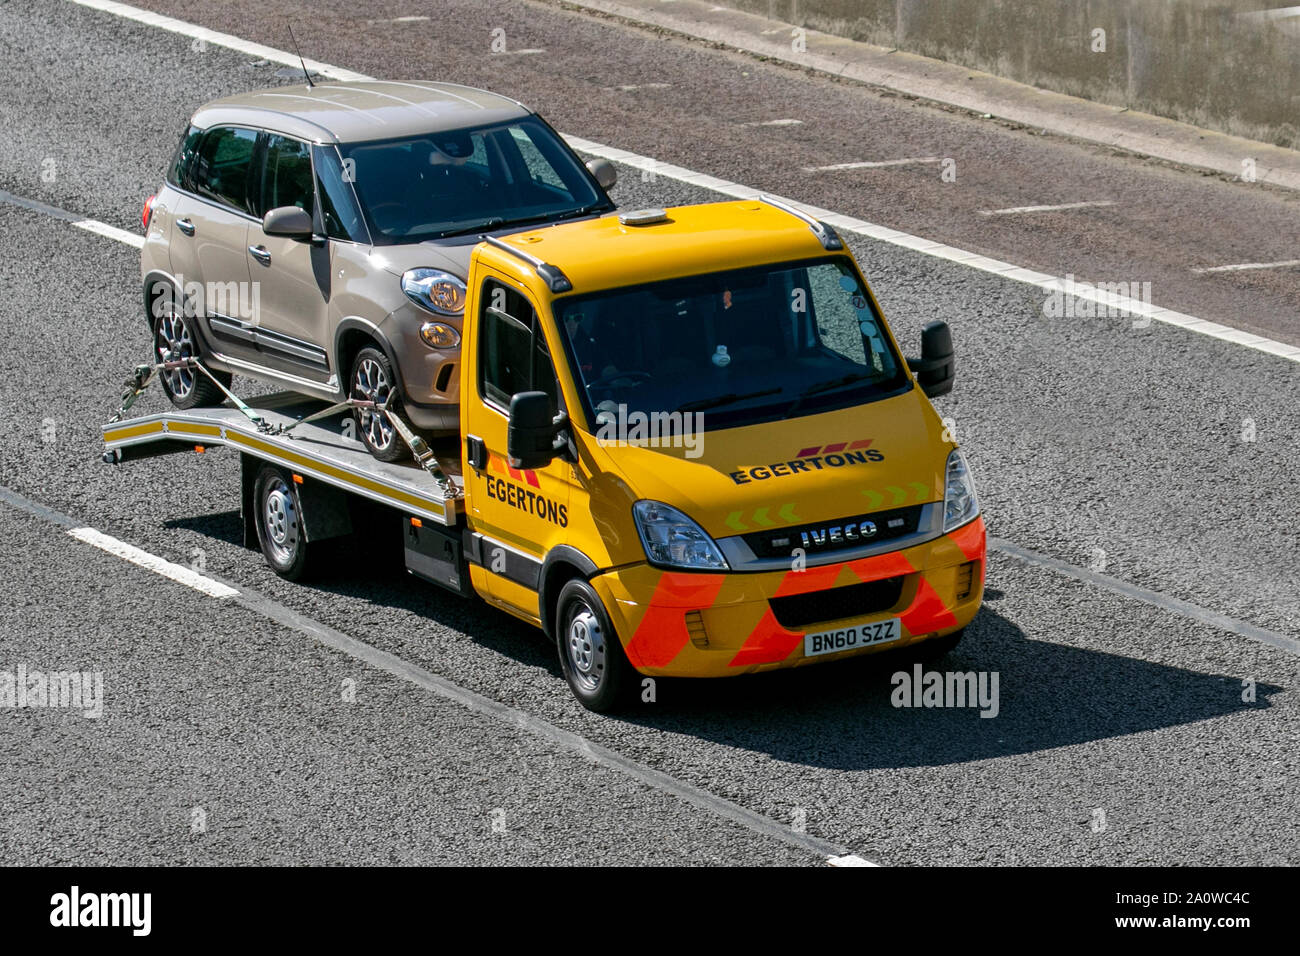 Egertons 24hr Vehicle roadside Recovery by yellow Iveco Daily 35S11 MWB; UK Vehicular traffic, transport, modern, saloon cars, south-bound on the 3 lane M6 motorway highway. Stock Photo